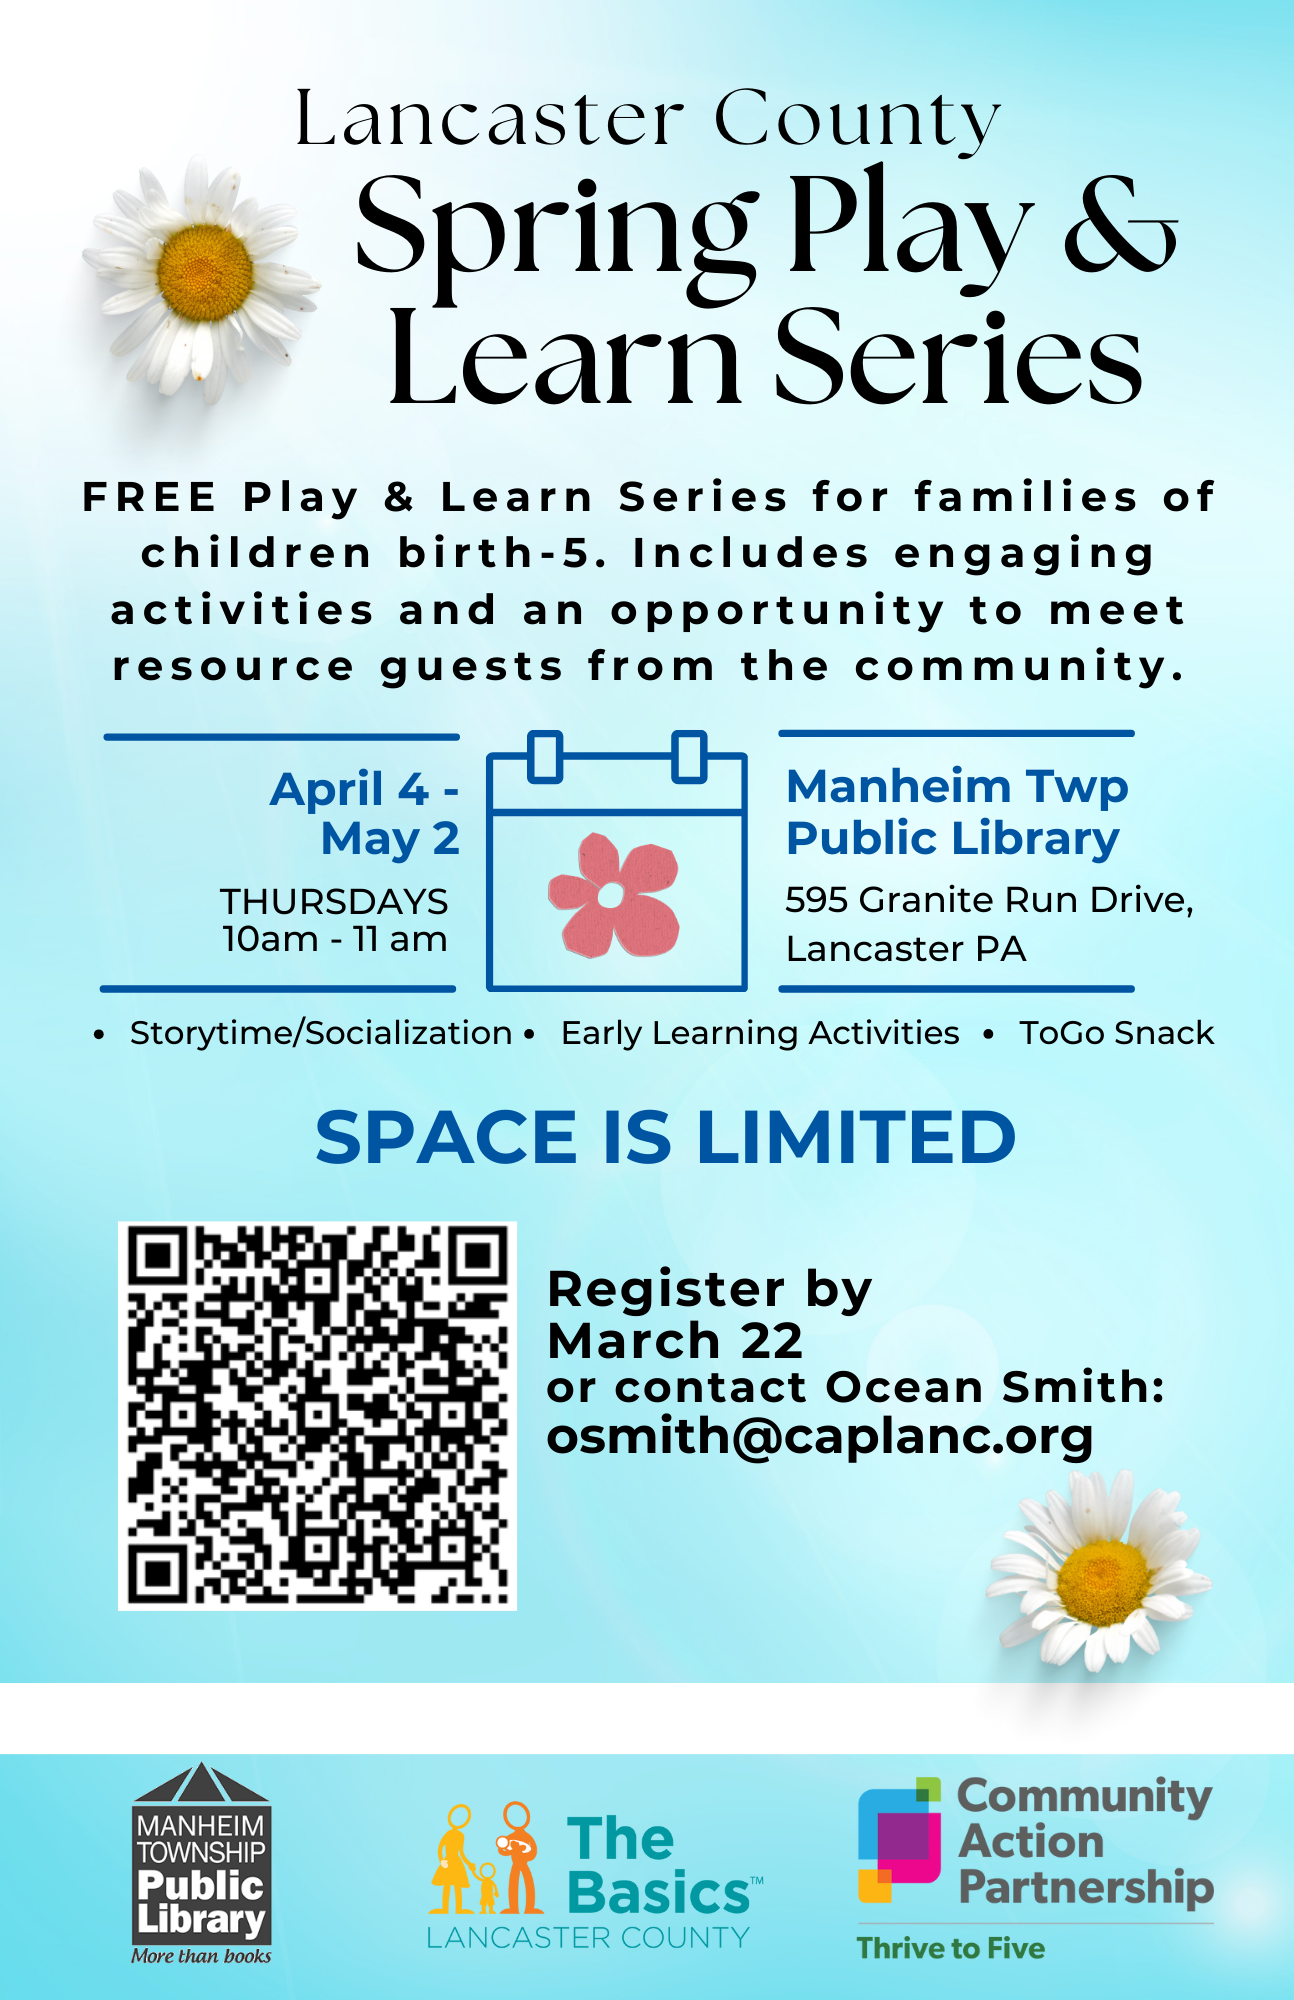 Poster for Spring Play & Learn series, text is repeated in event description.